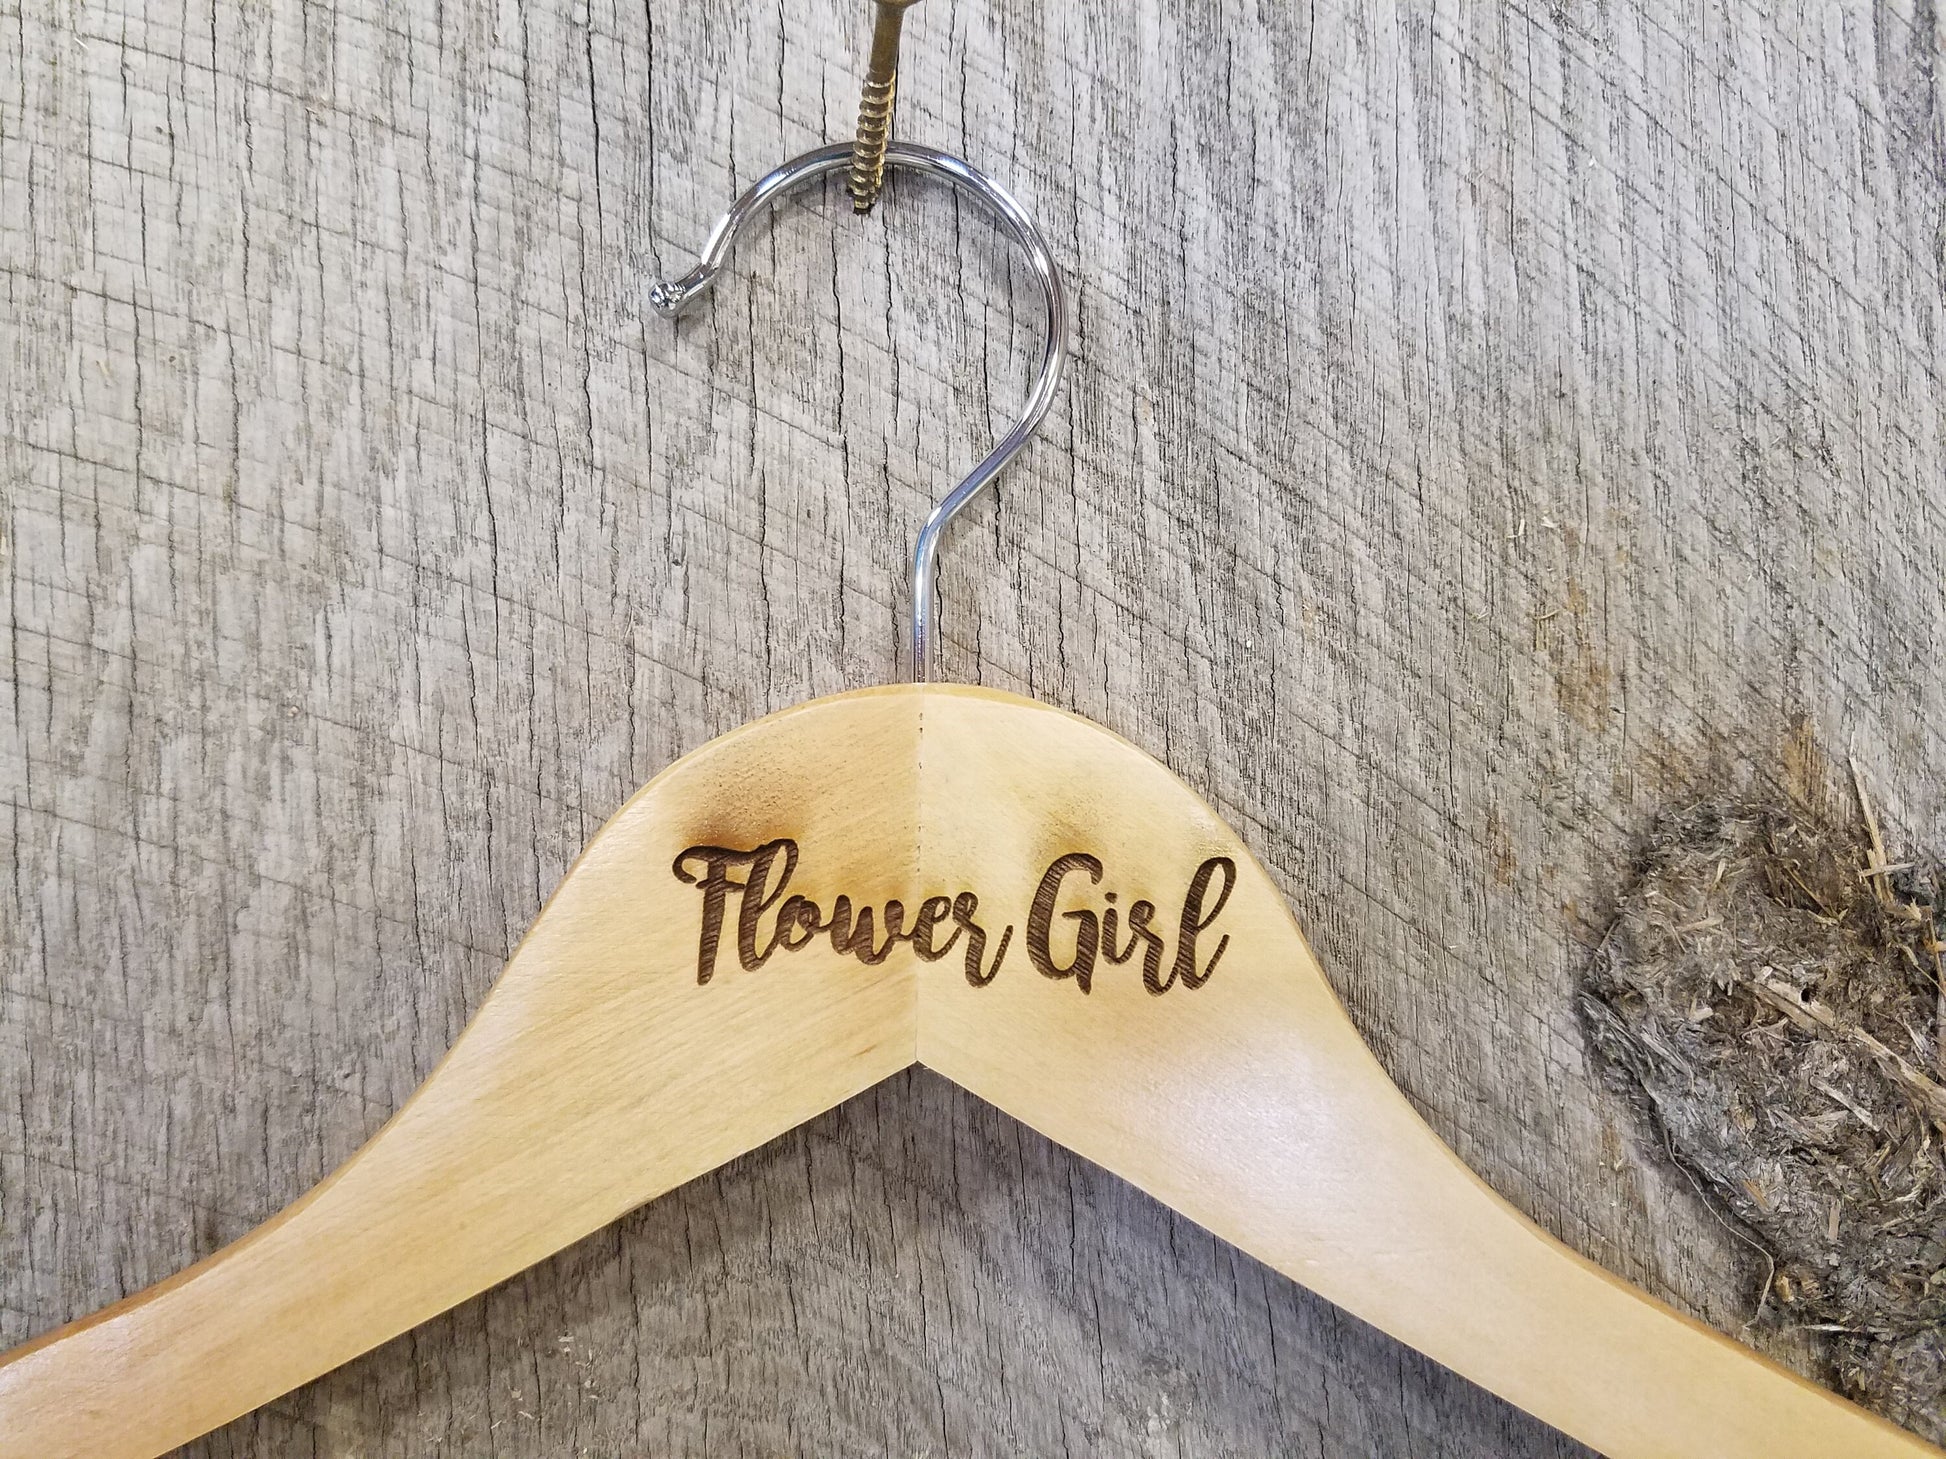 Flower Girl Dress Clothes Hanger Bridal Party Engraved Hard Wood Coat Sturdy Wedding Bromellow Personalized